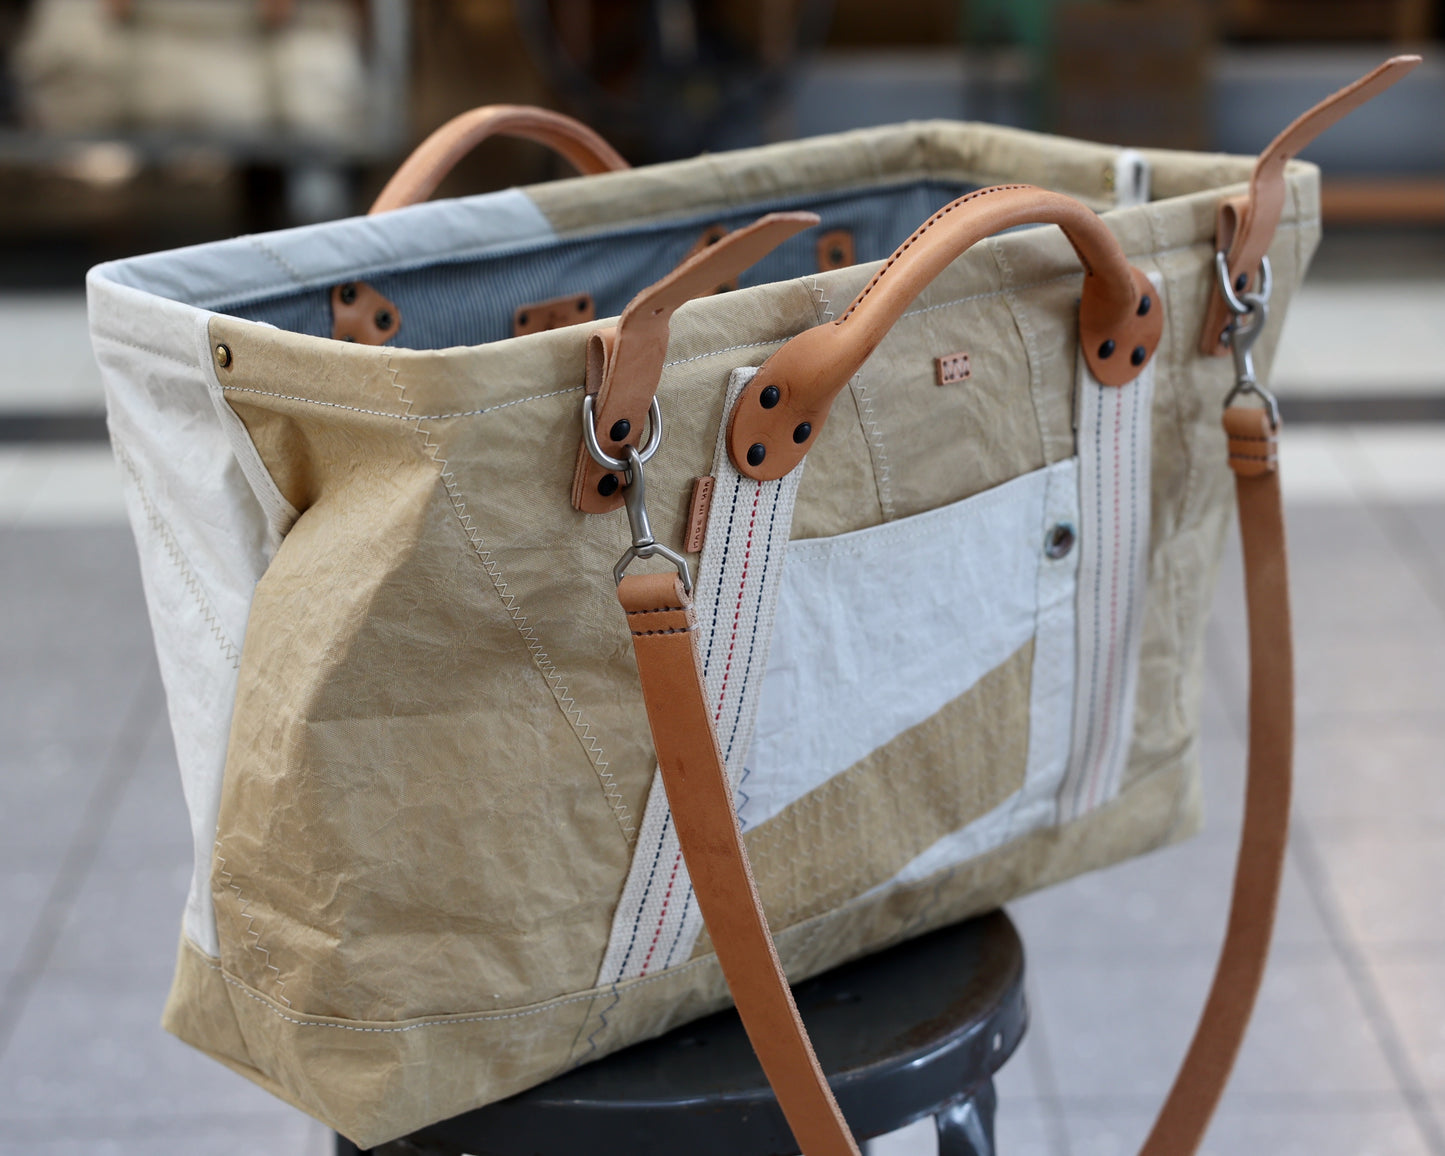 Tool Bag Weekender Made from an Old Sail